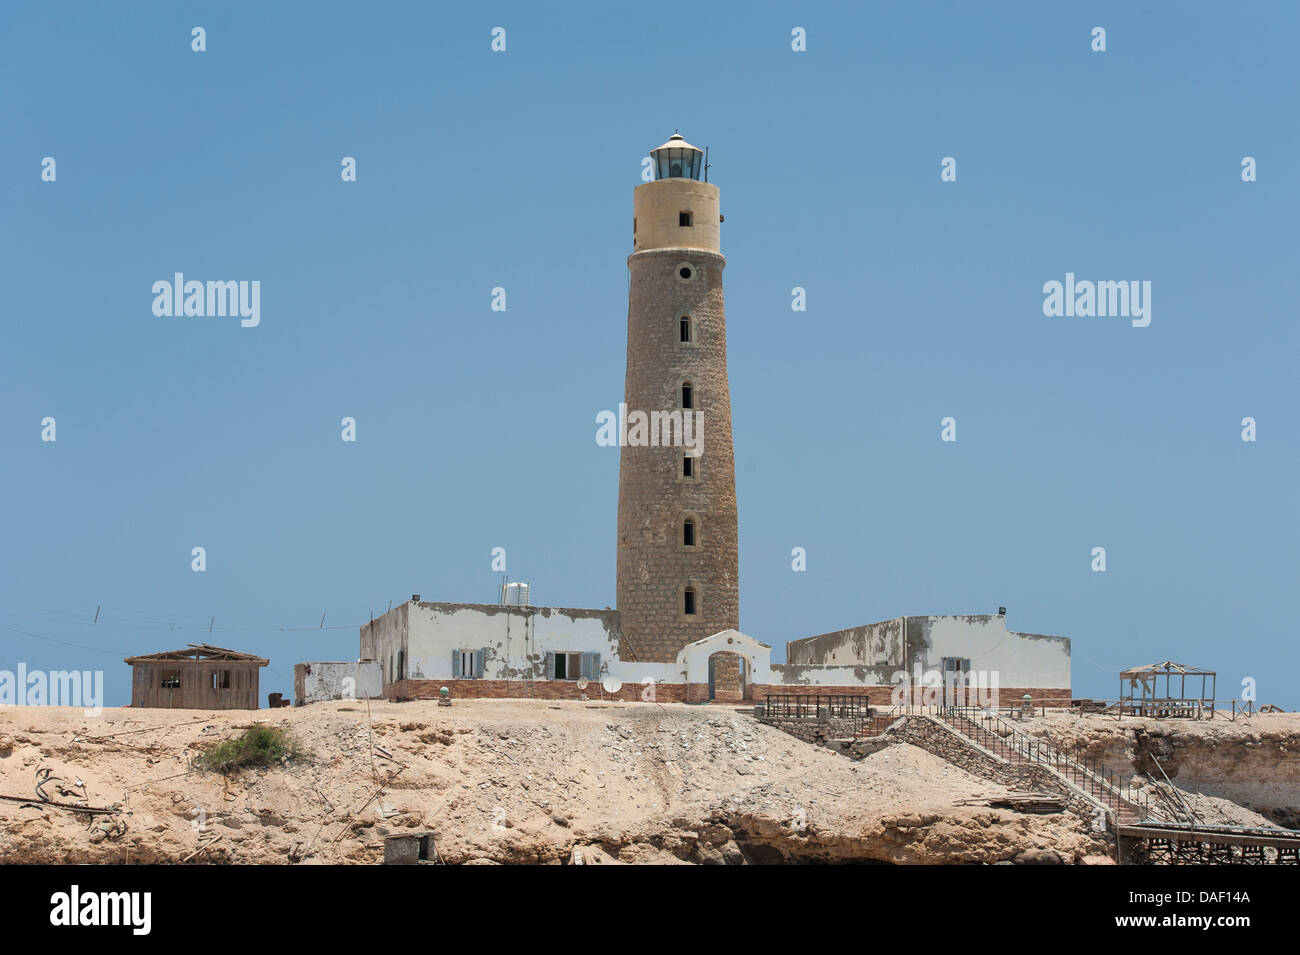 Old lighthouse building on an offshore Egyptian Island in the Red Sea Stock Photo